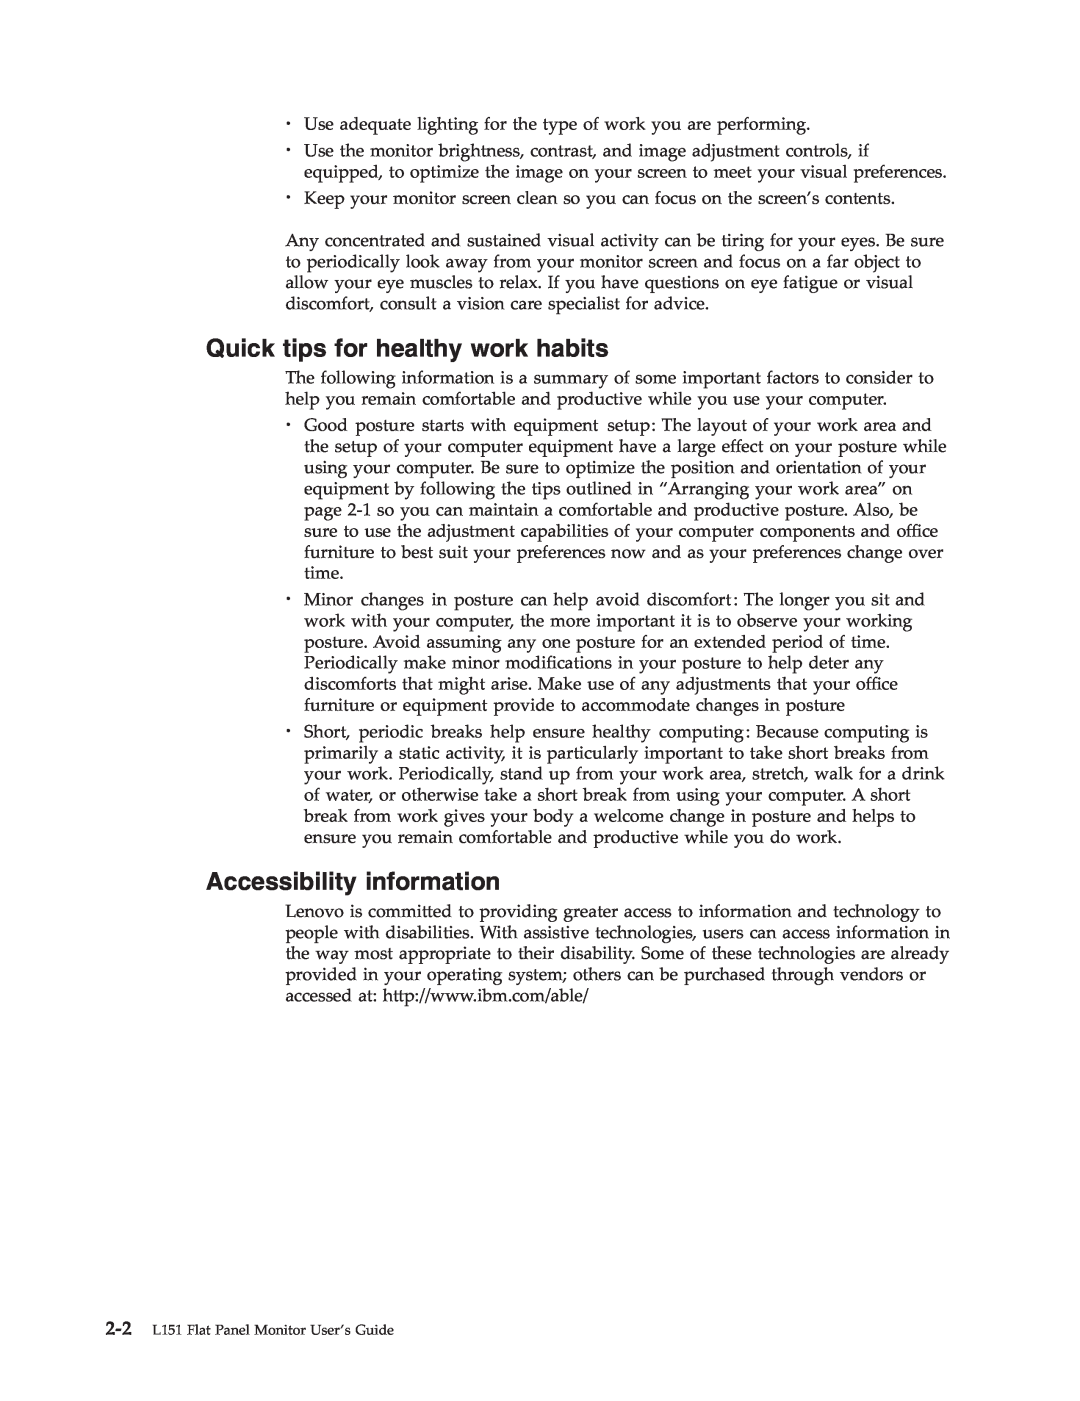 Lenovo 41A4142 manual 1UICK TIPS FOR HEALTHY WORK HABITS, Ccessibility Information 